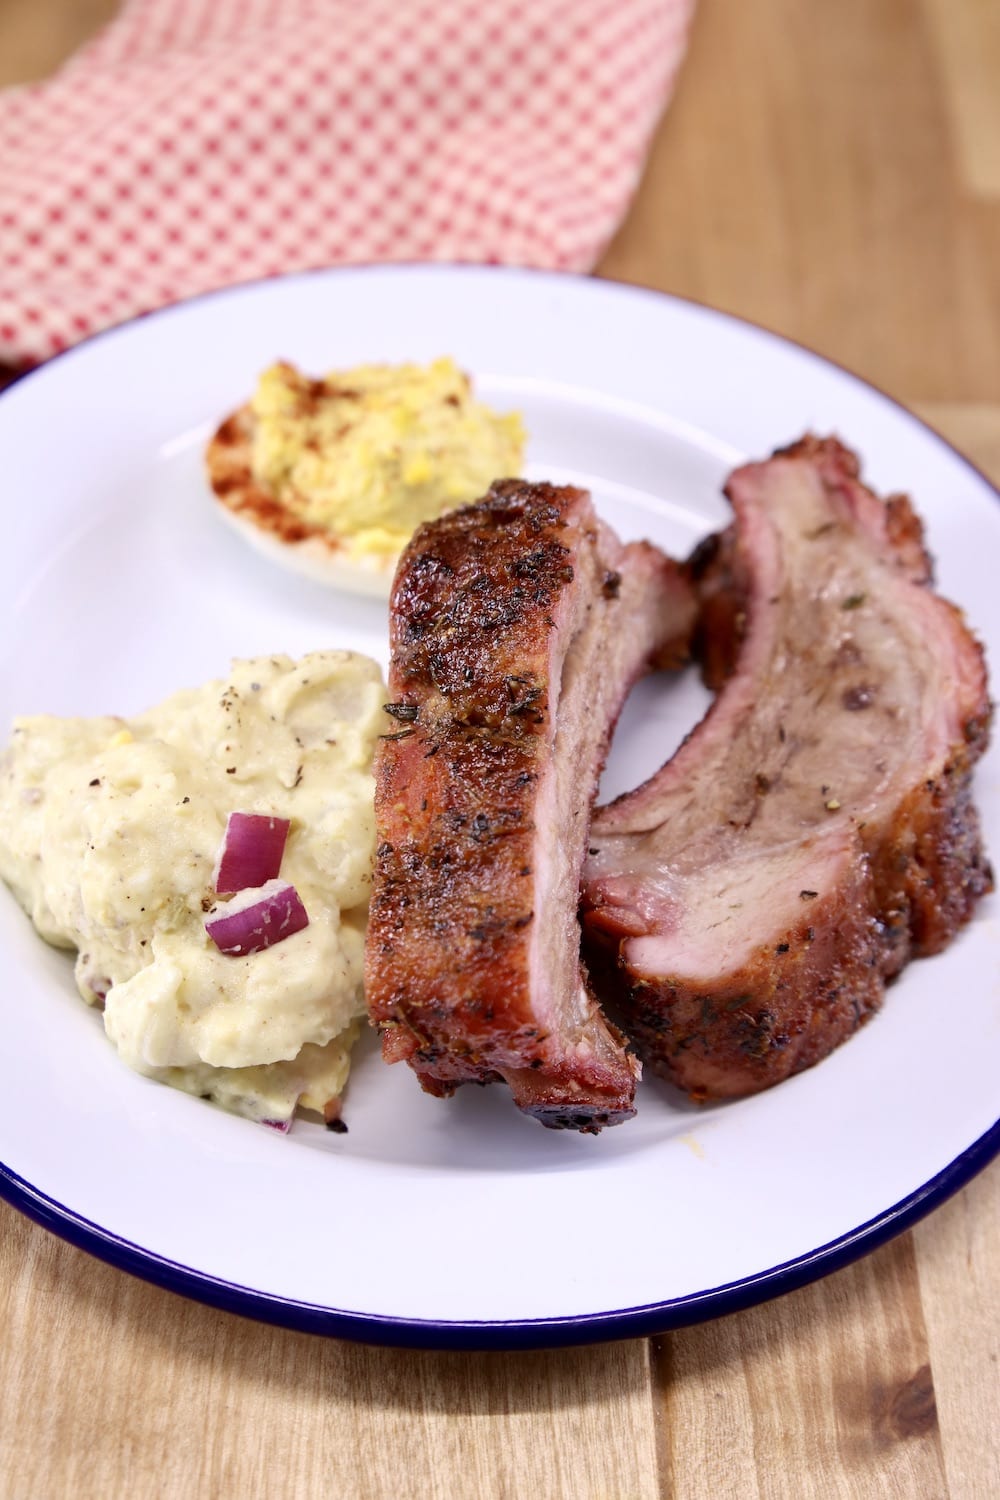 Plate with 2 baby back ribs, potato salad and deviled egg